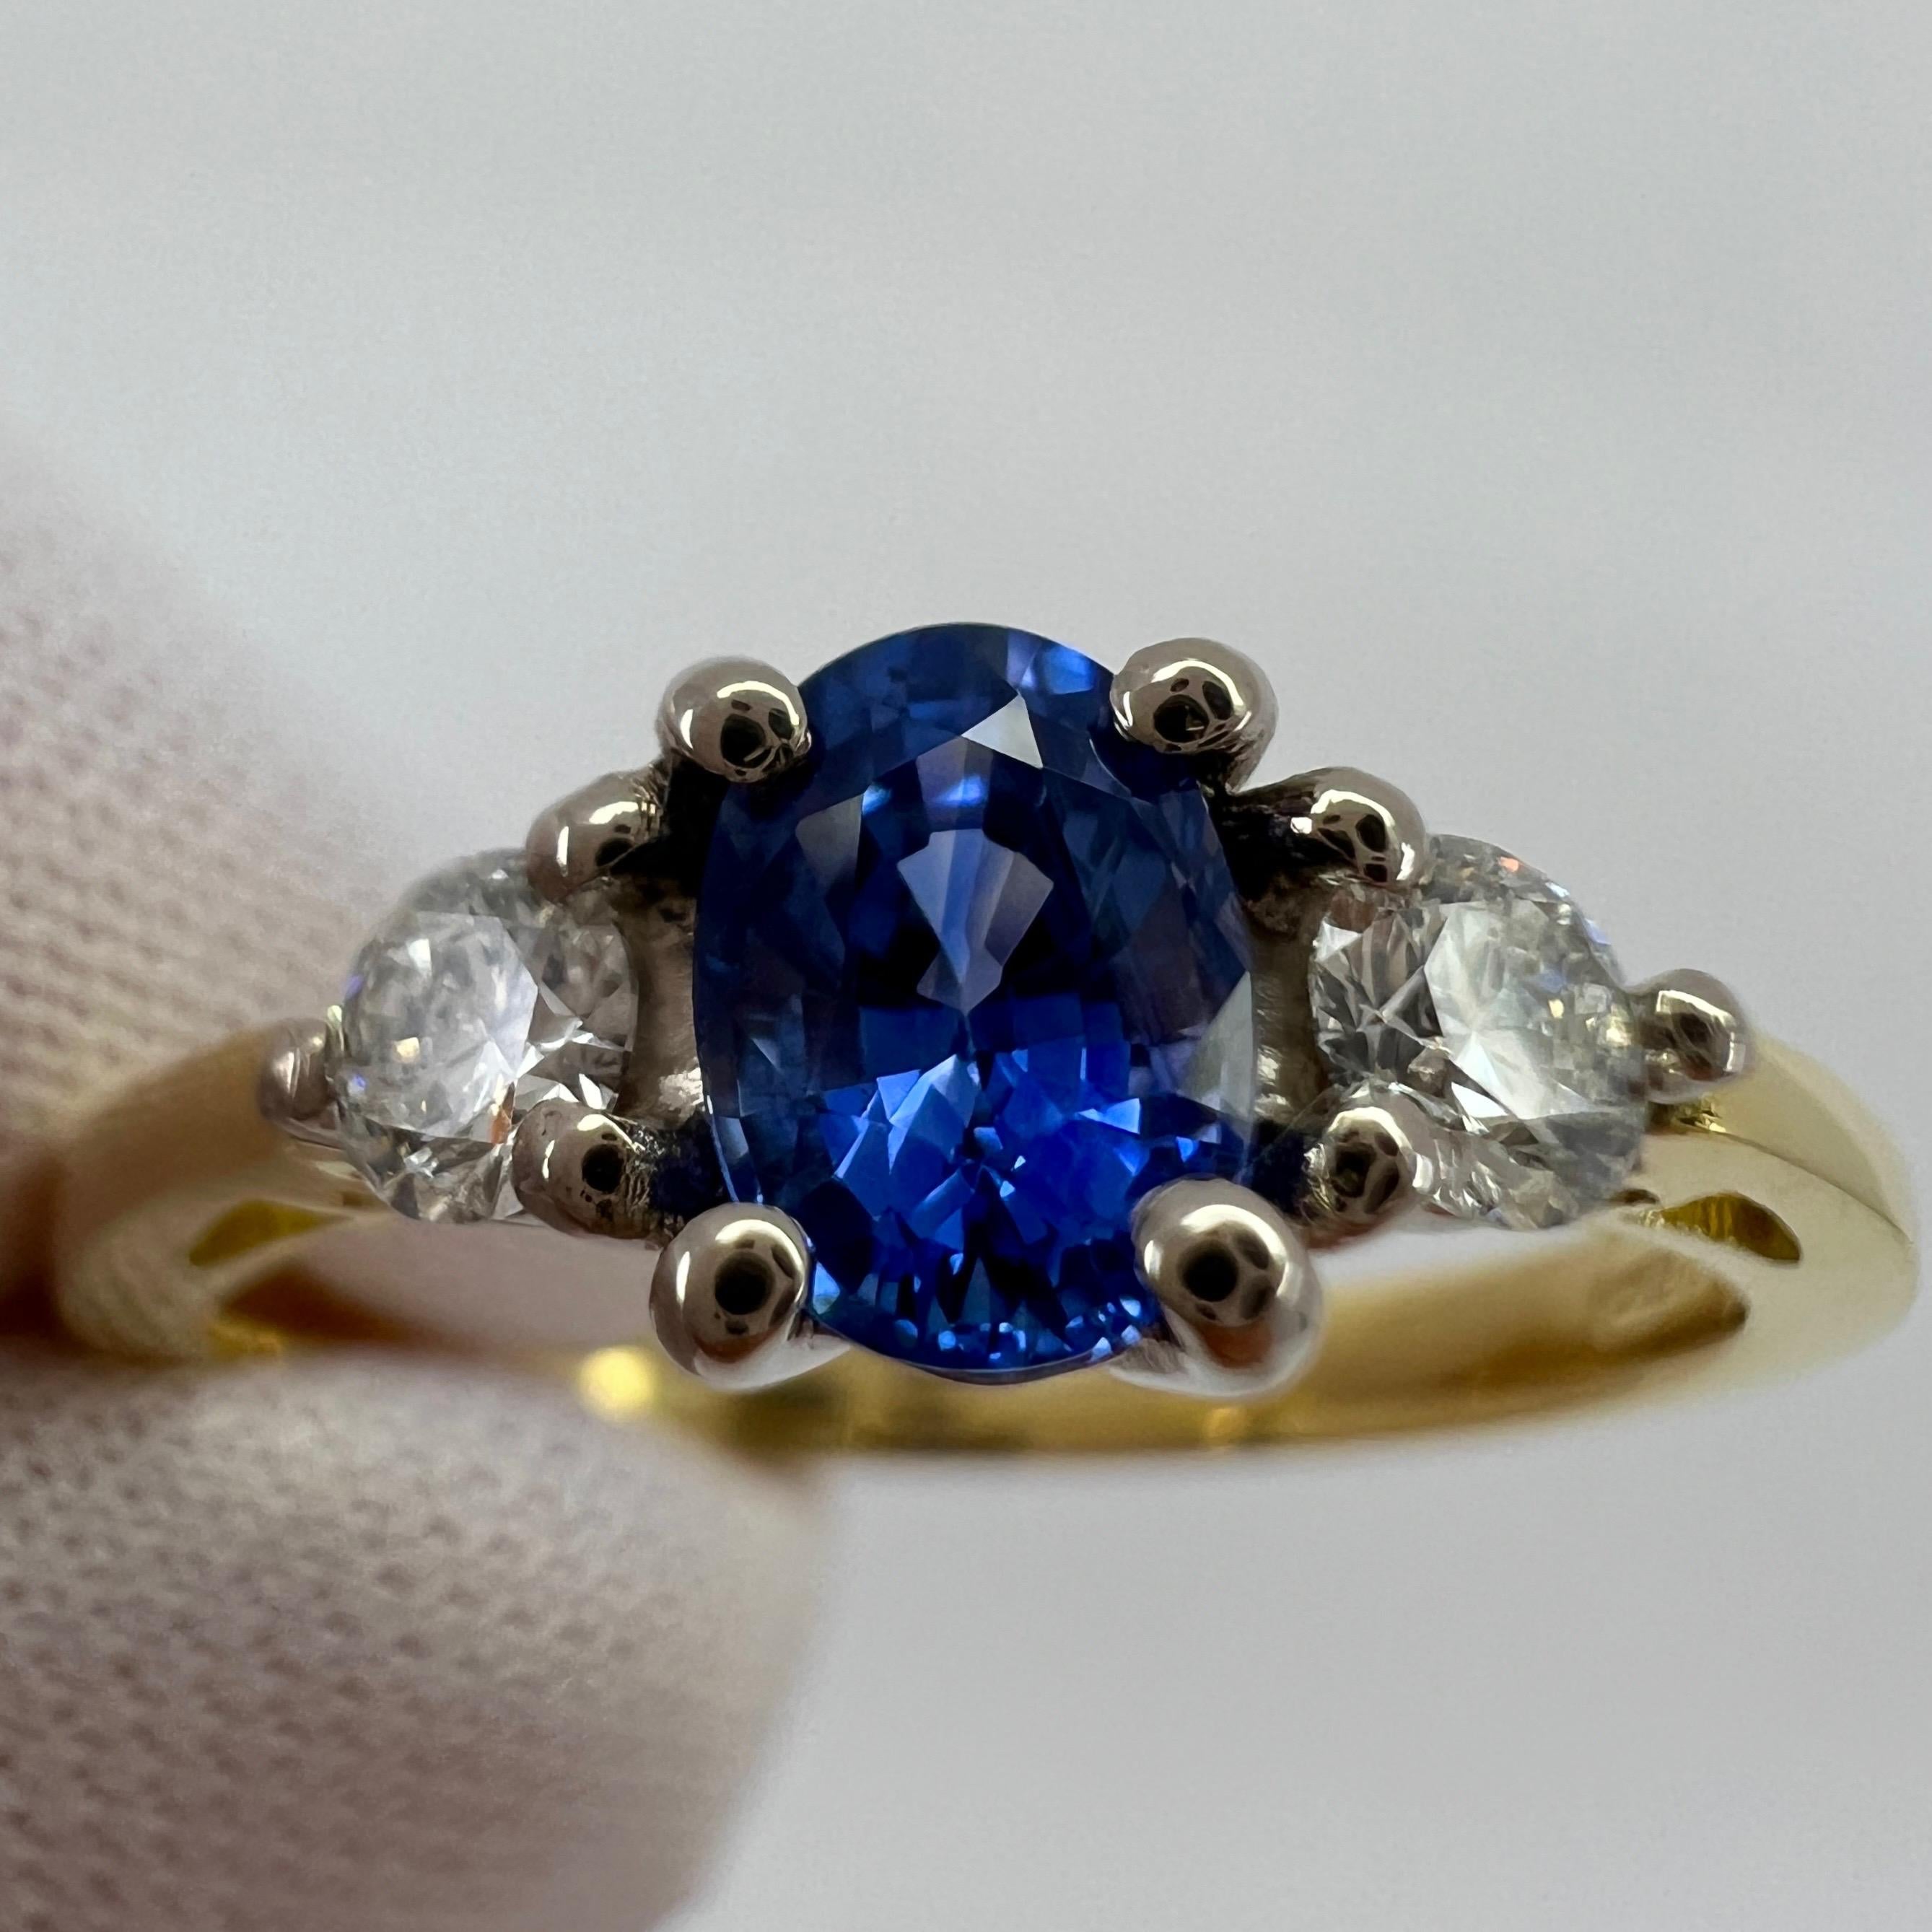 Fine Cornflower Blue Oval Cut Ceylon Sapphire & Diamond Three Stone 18k Gold Ring.

Fine colour Ceylon Cornflower blue oval cut sapphire centre stone. 0.65ct measuring just under 6x4mm. Mined in Sri Lanka, source of some of the finest sapphires in